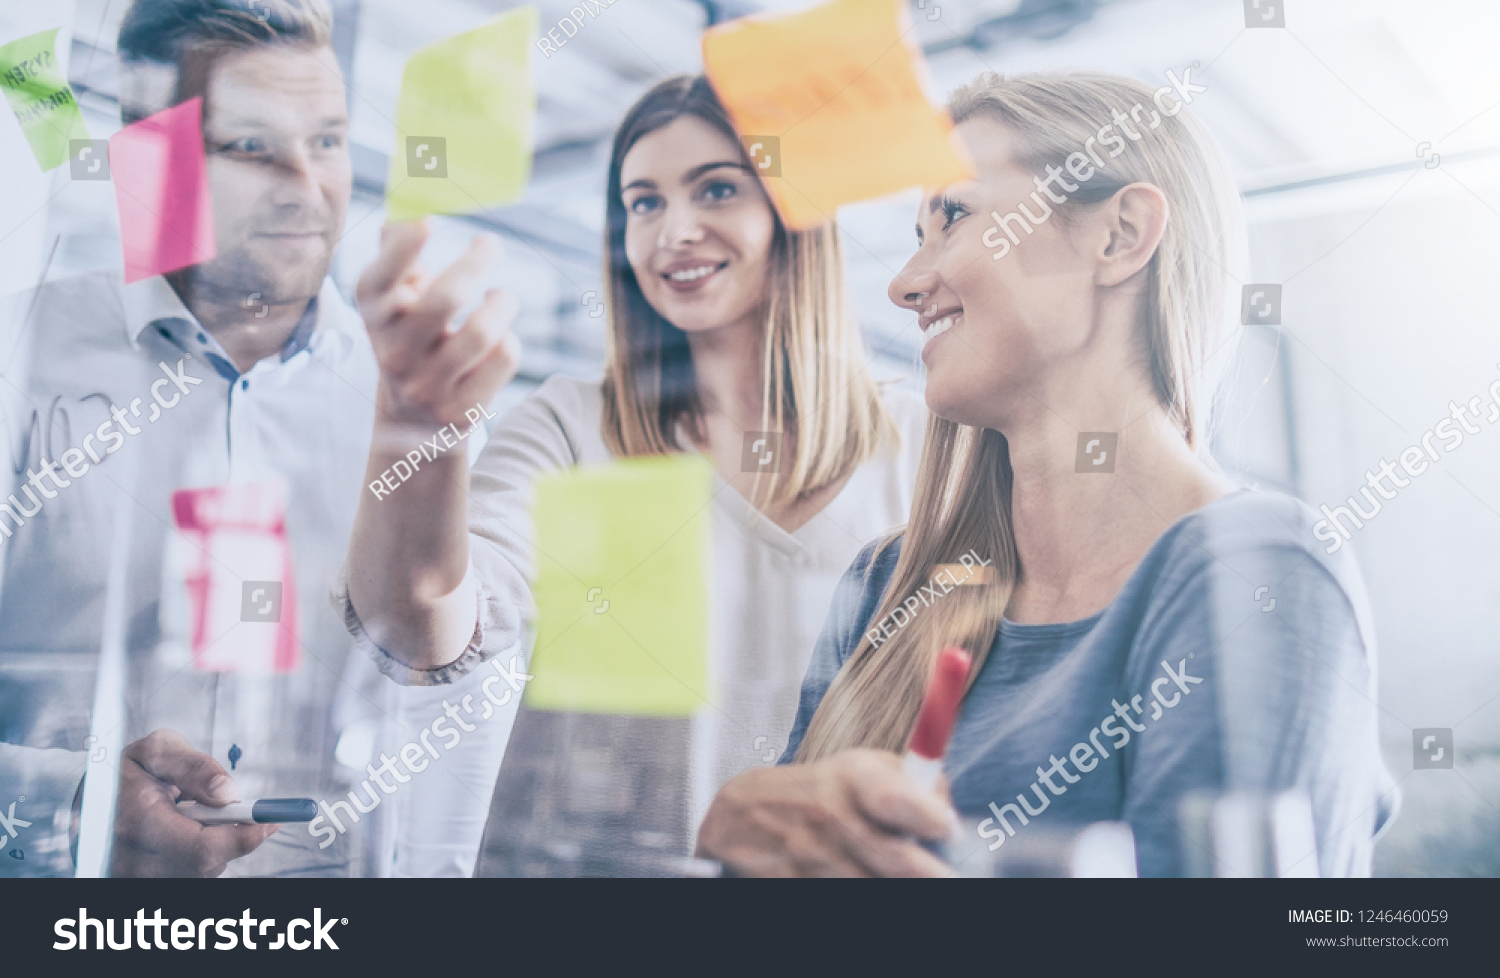 Business people meeting at office and use post it notes to share idea. Brainstorming concept. Sticky note on glass wall. #1246460059